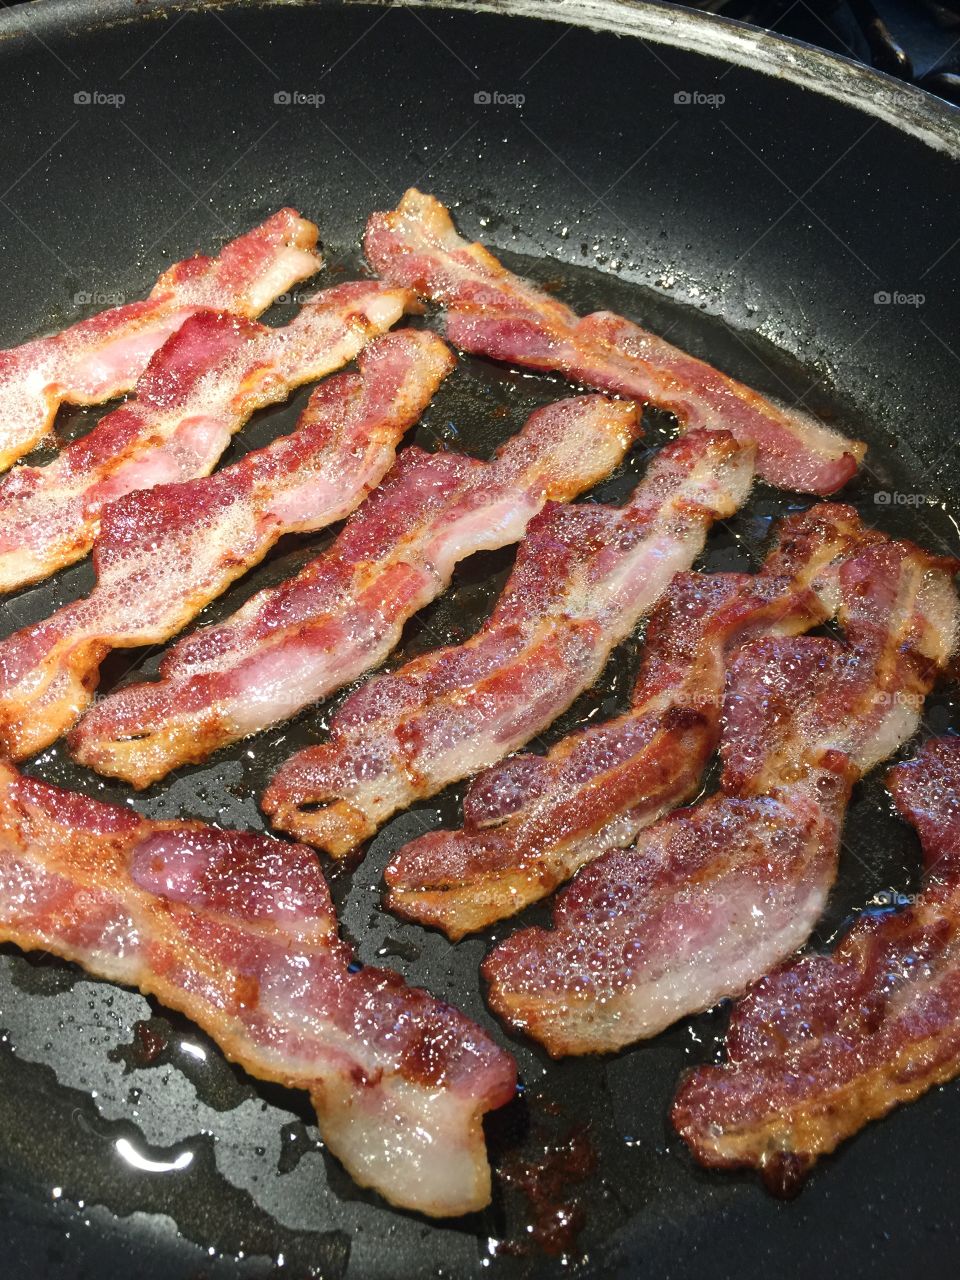 The bacon is almost done!